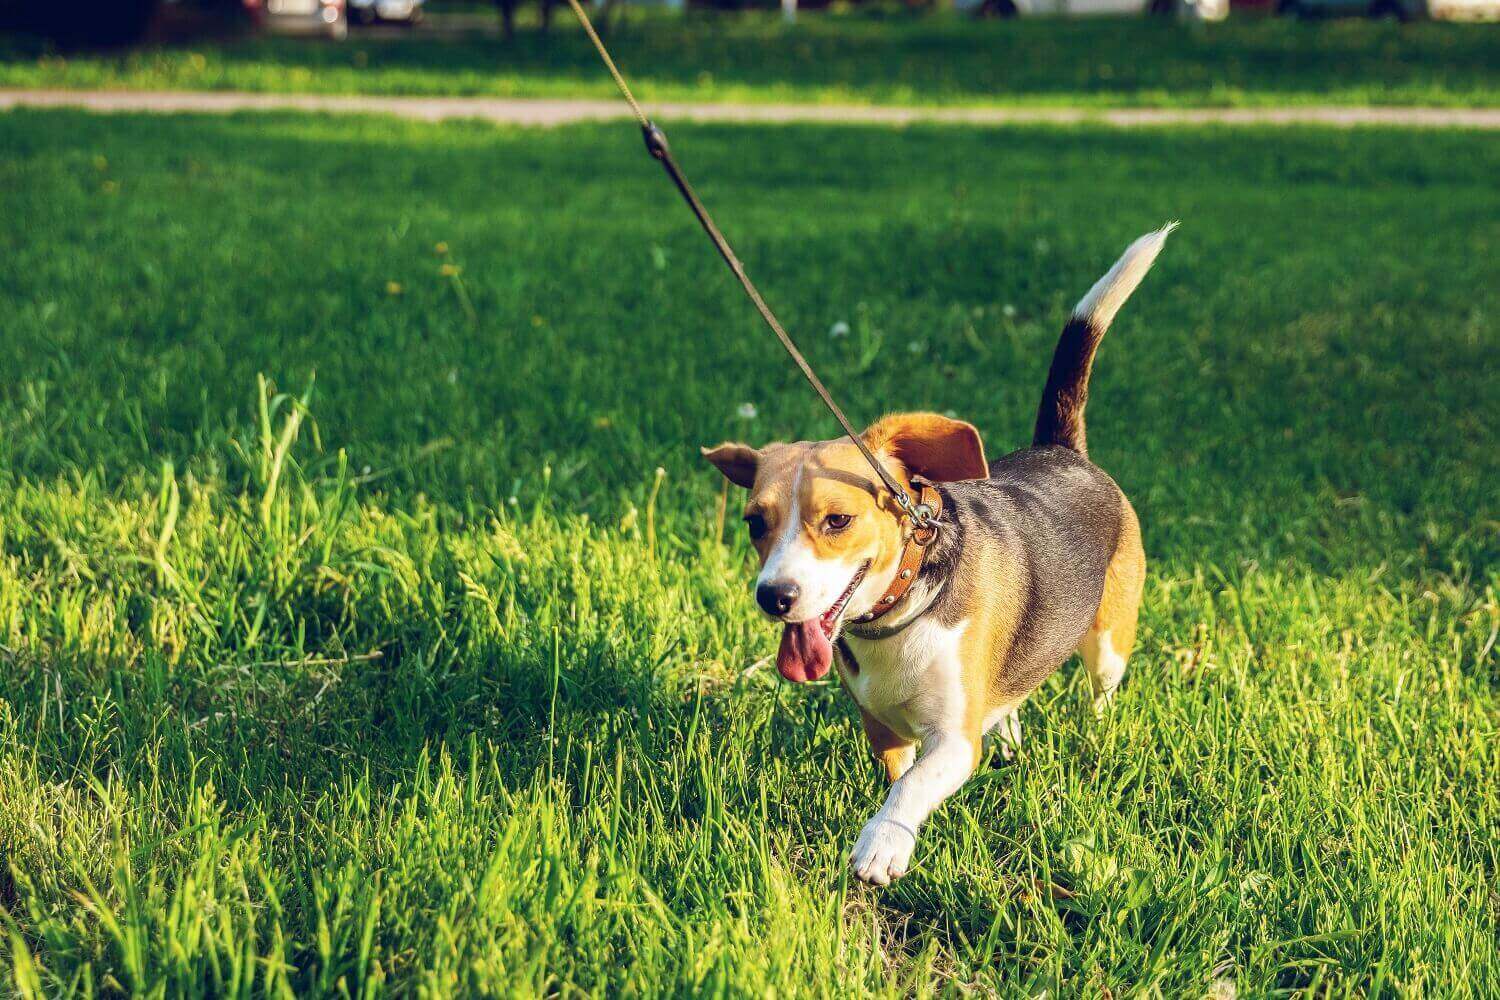 How to teach your puppy to leash